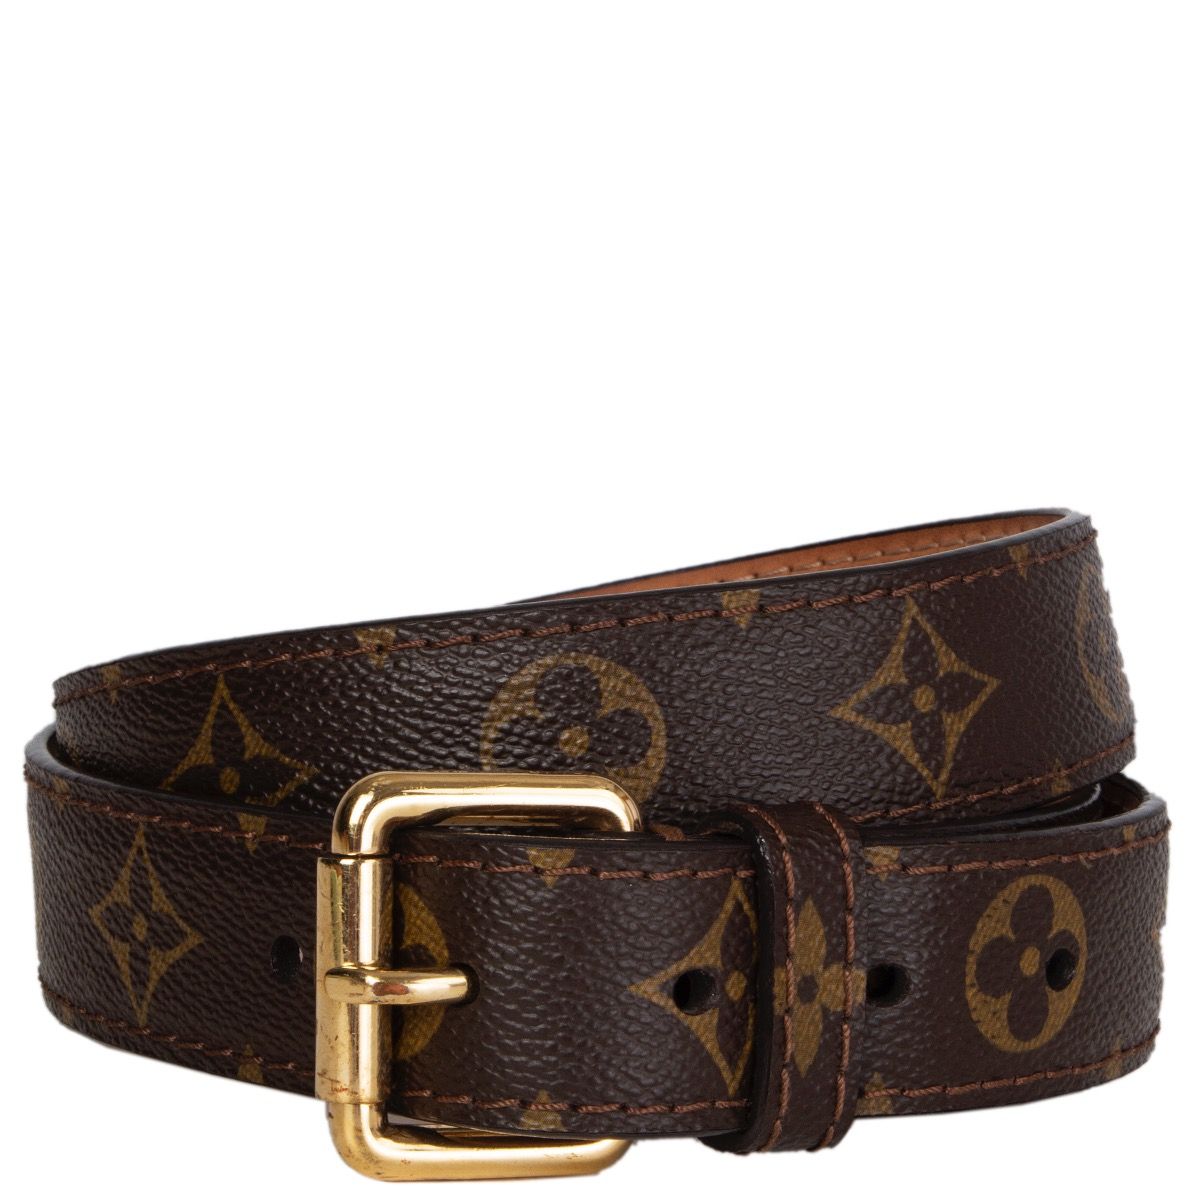 Louis Vuitton - Authenticated Belt - Leather Green for Men, Very Good Condition